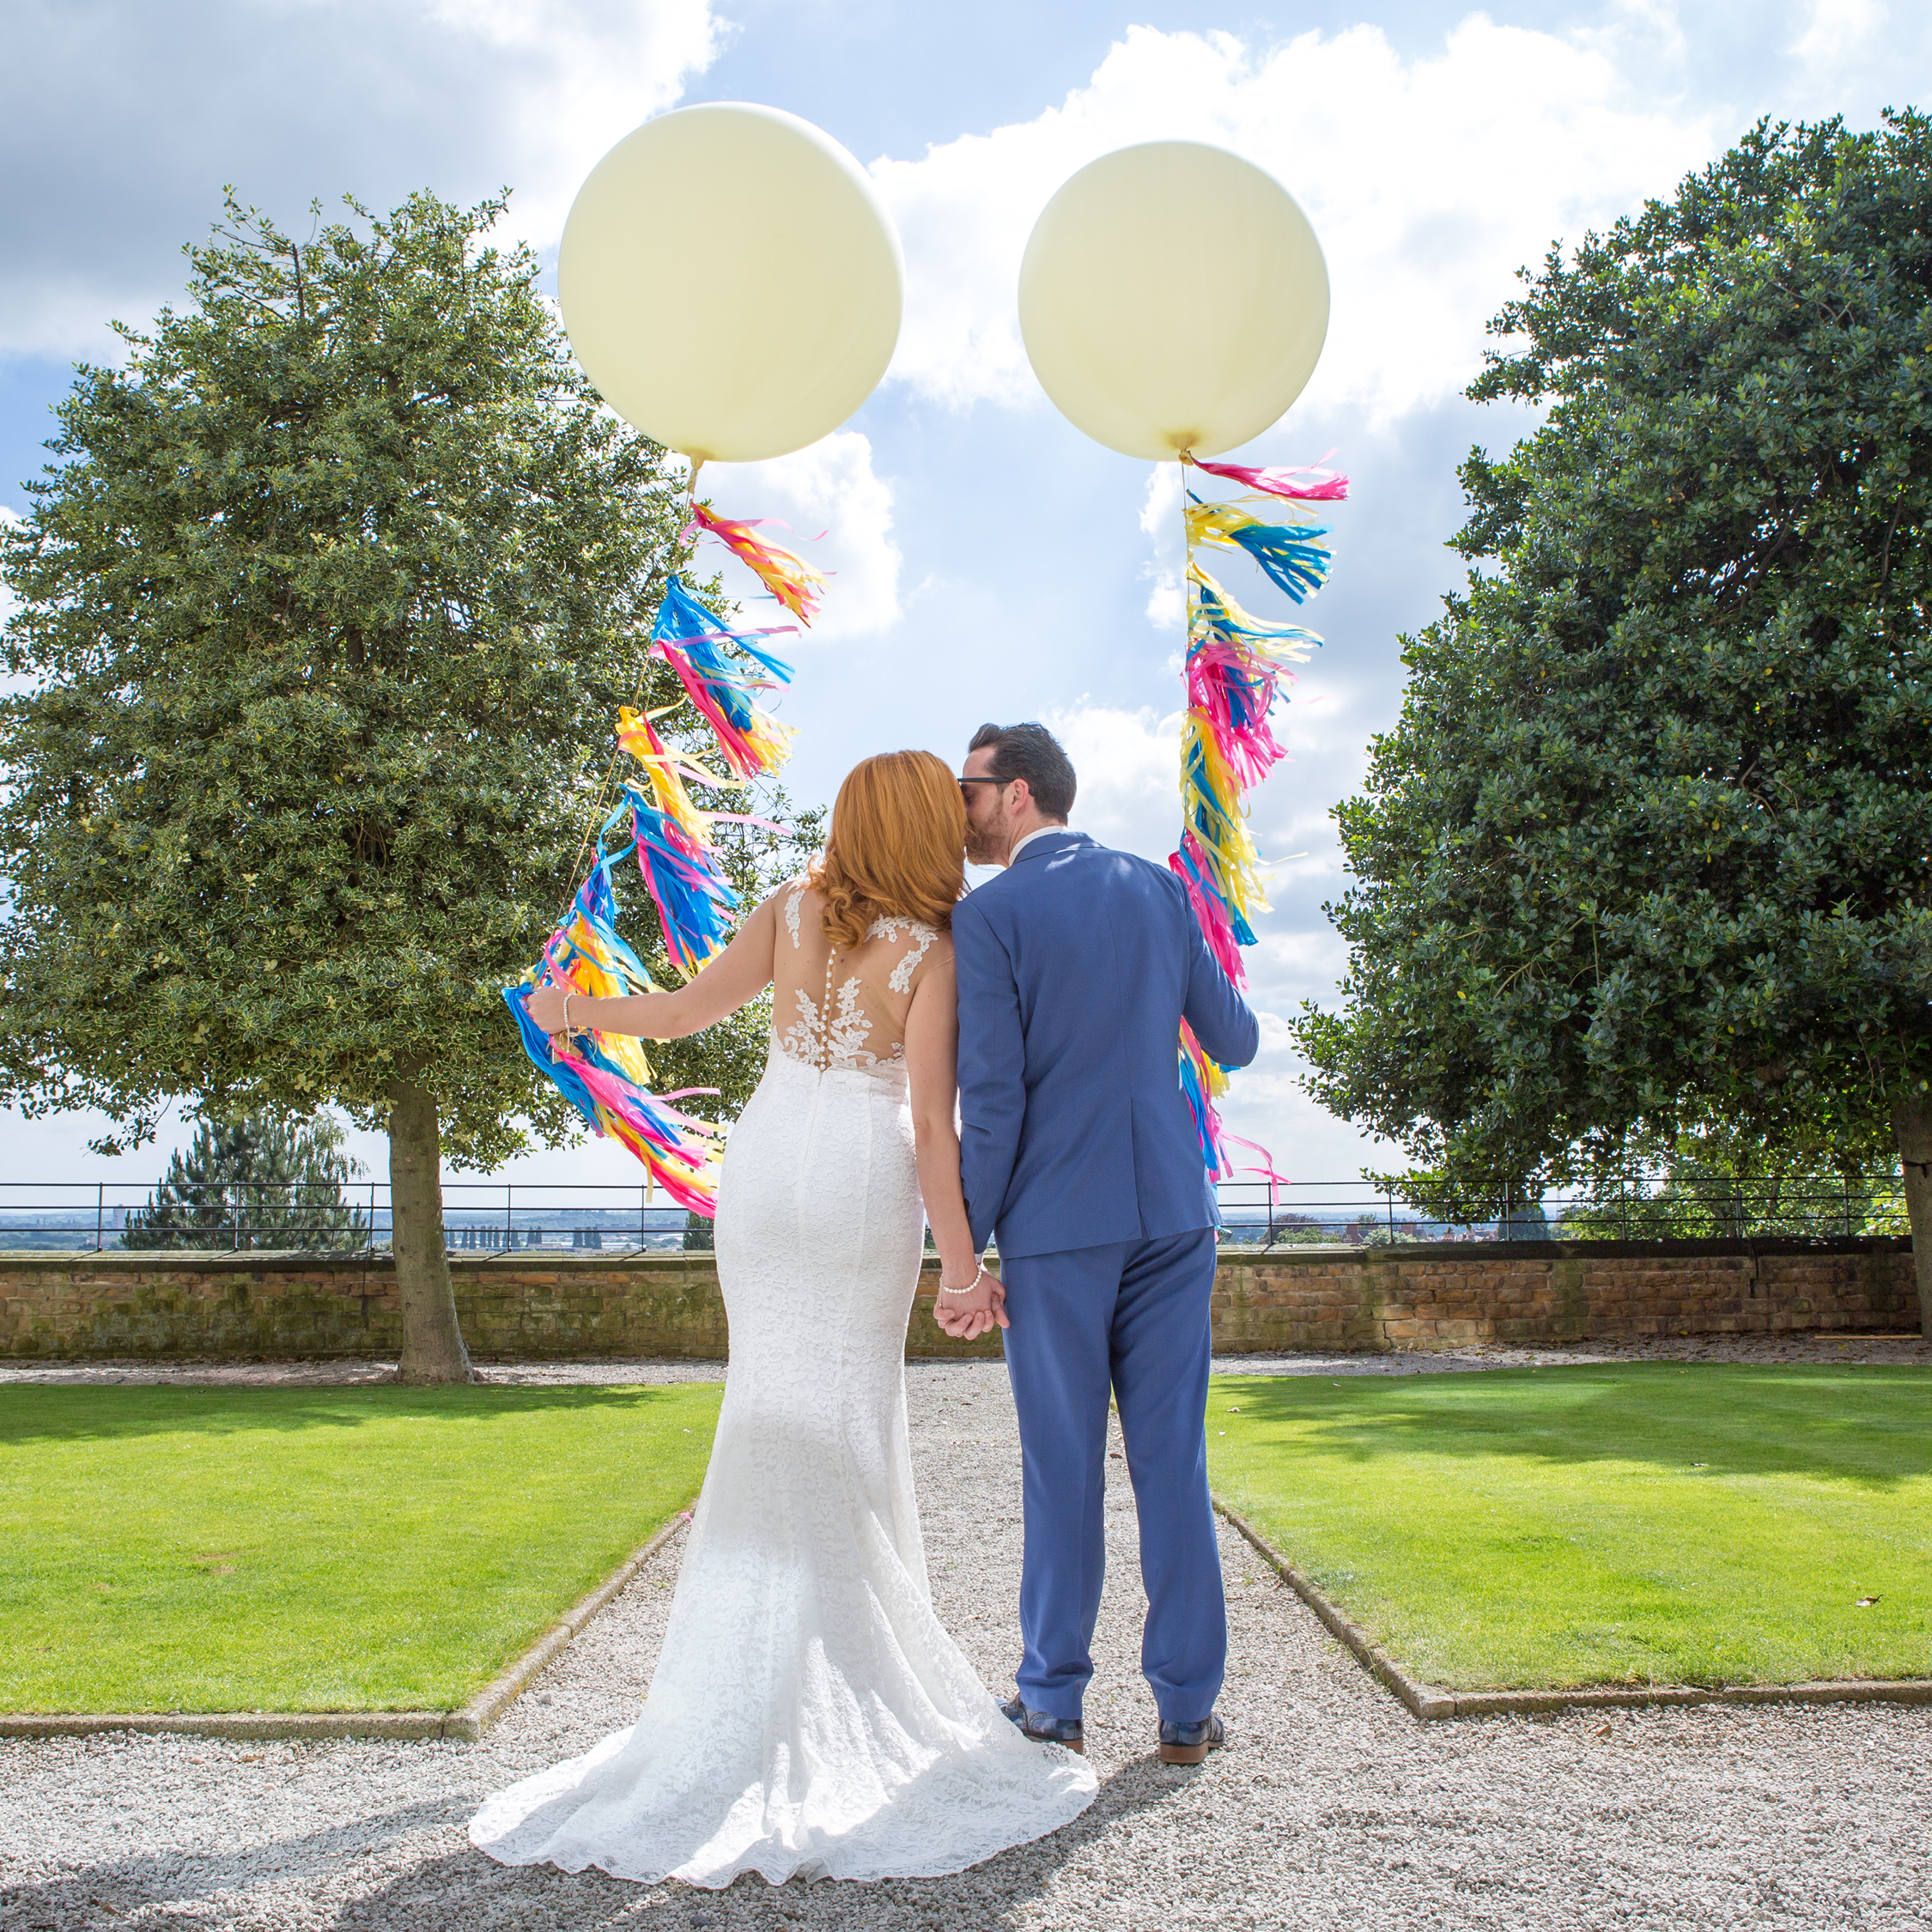 wedding balloon release, wedding decorations with balloons